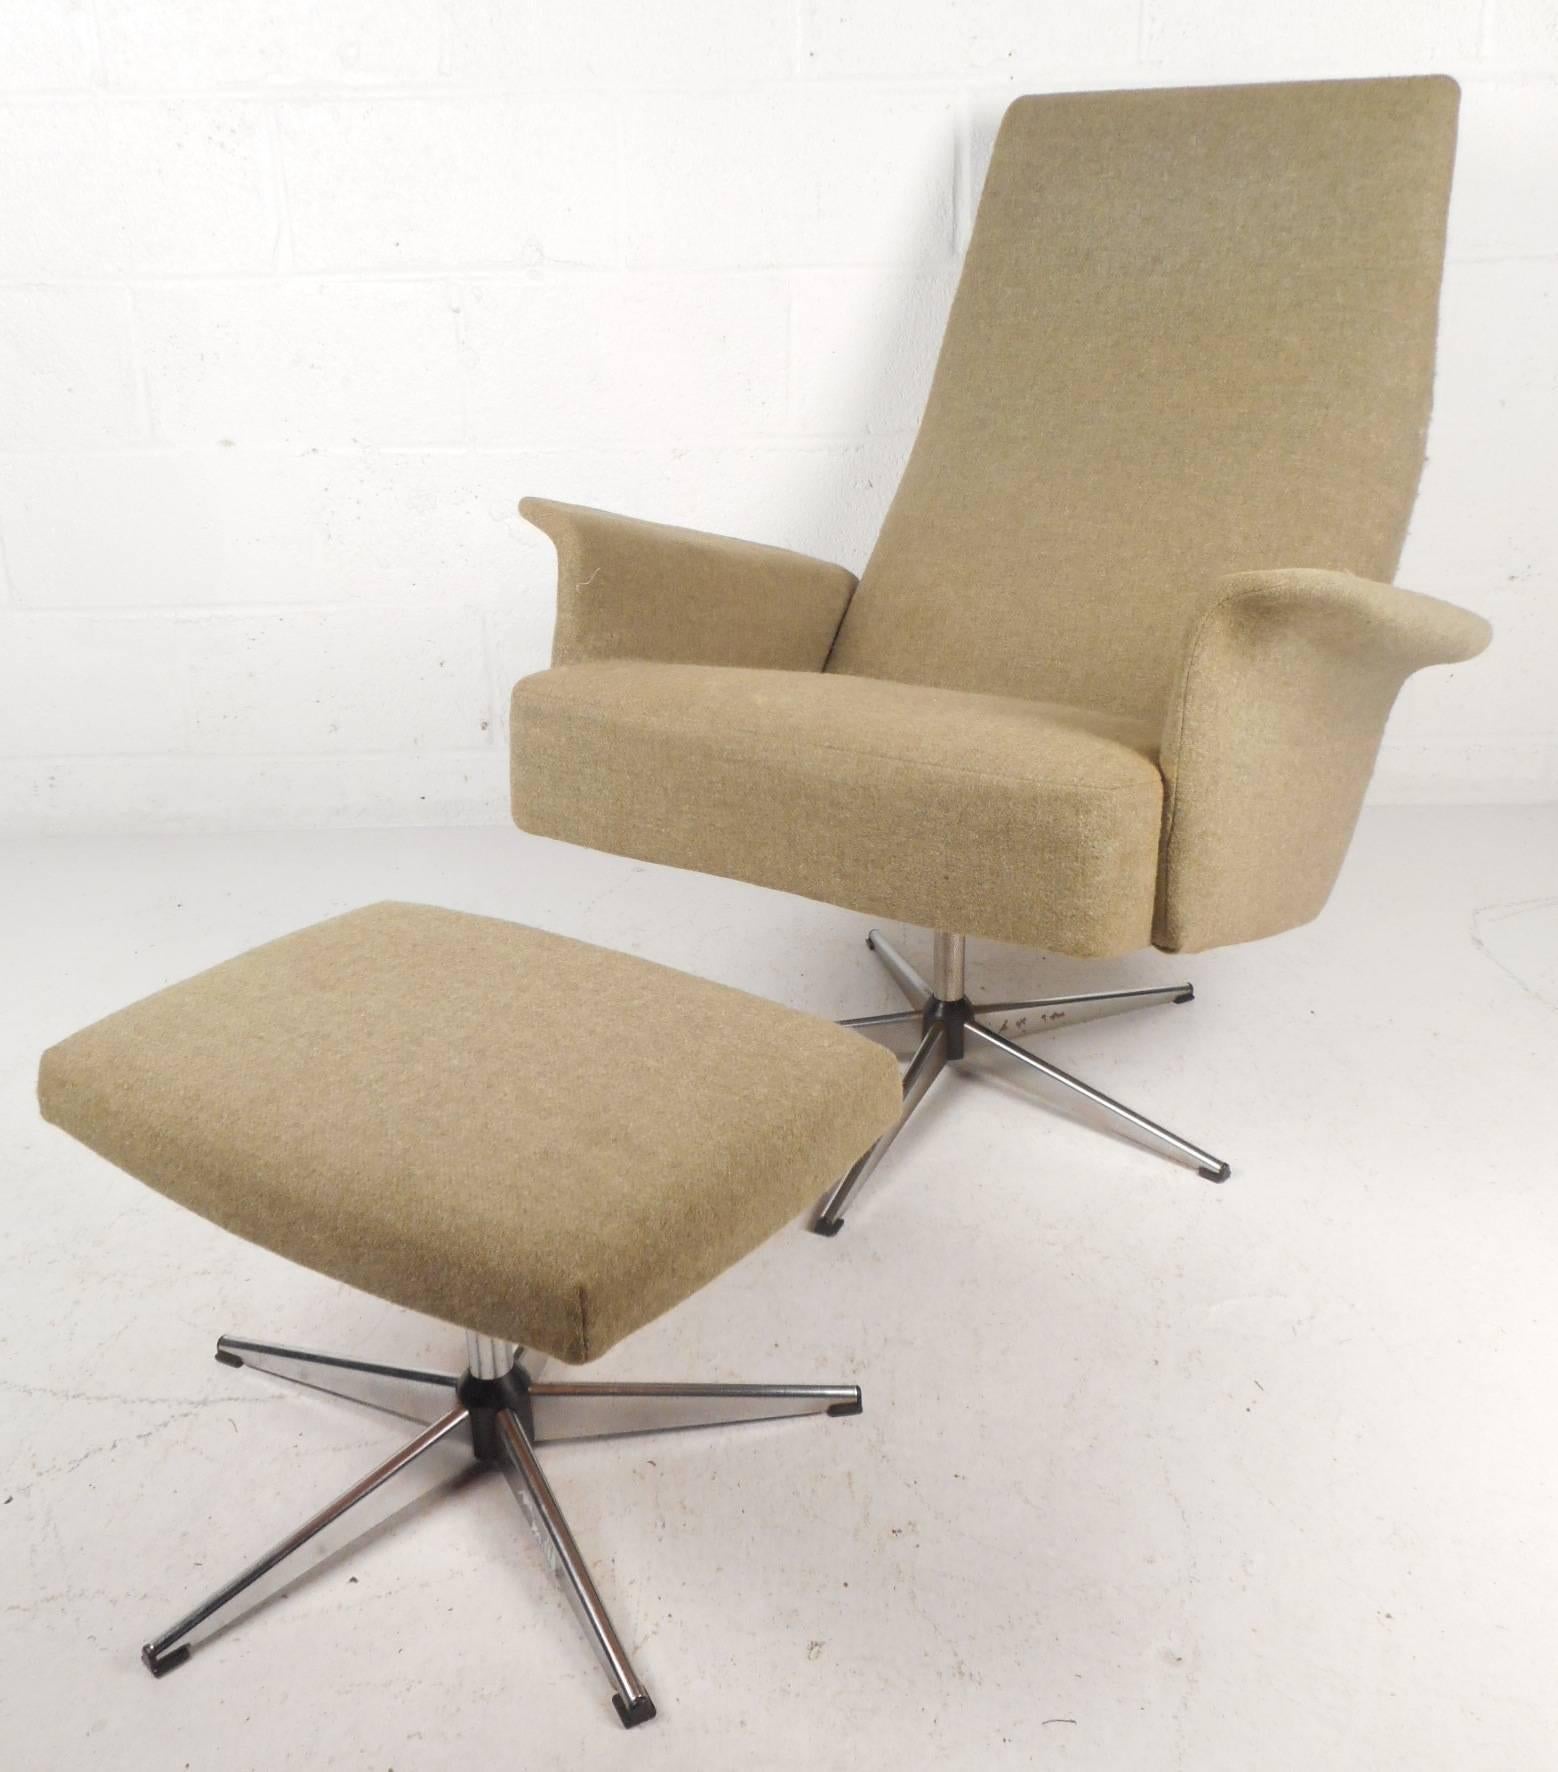 This impressive vintage modern lounge chair and ottoman features unusual winged arm rests ensuring maximum comfort without sacrificing style. Beautiful plush light green upholstery, a chrome swivel base, and a high backrest add to the allure. Sleek